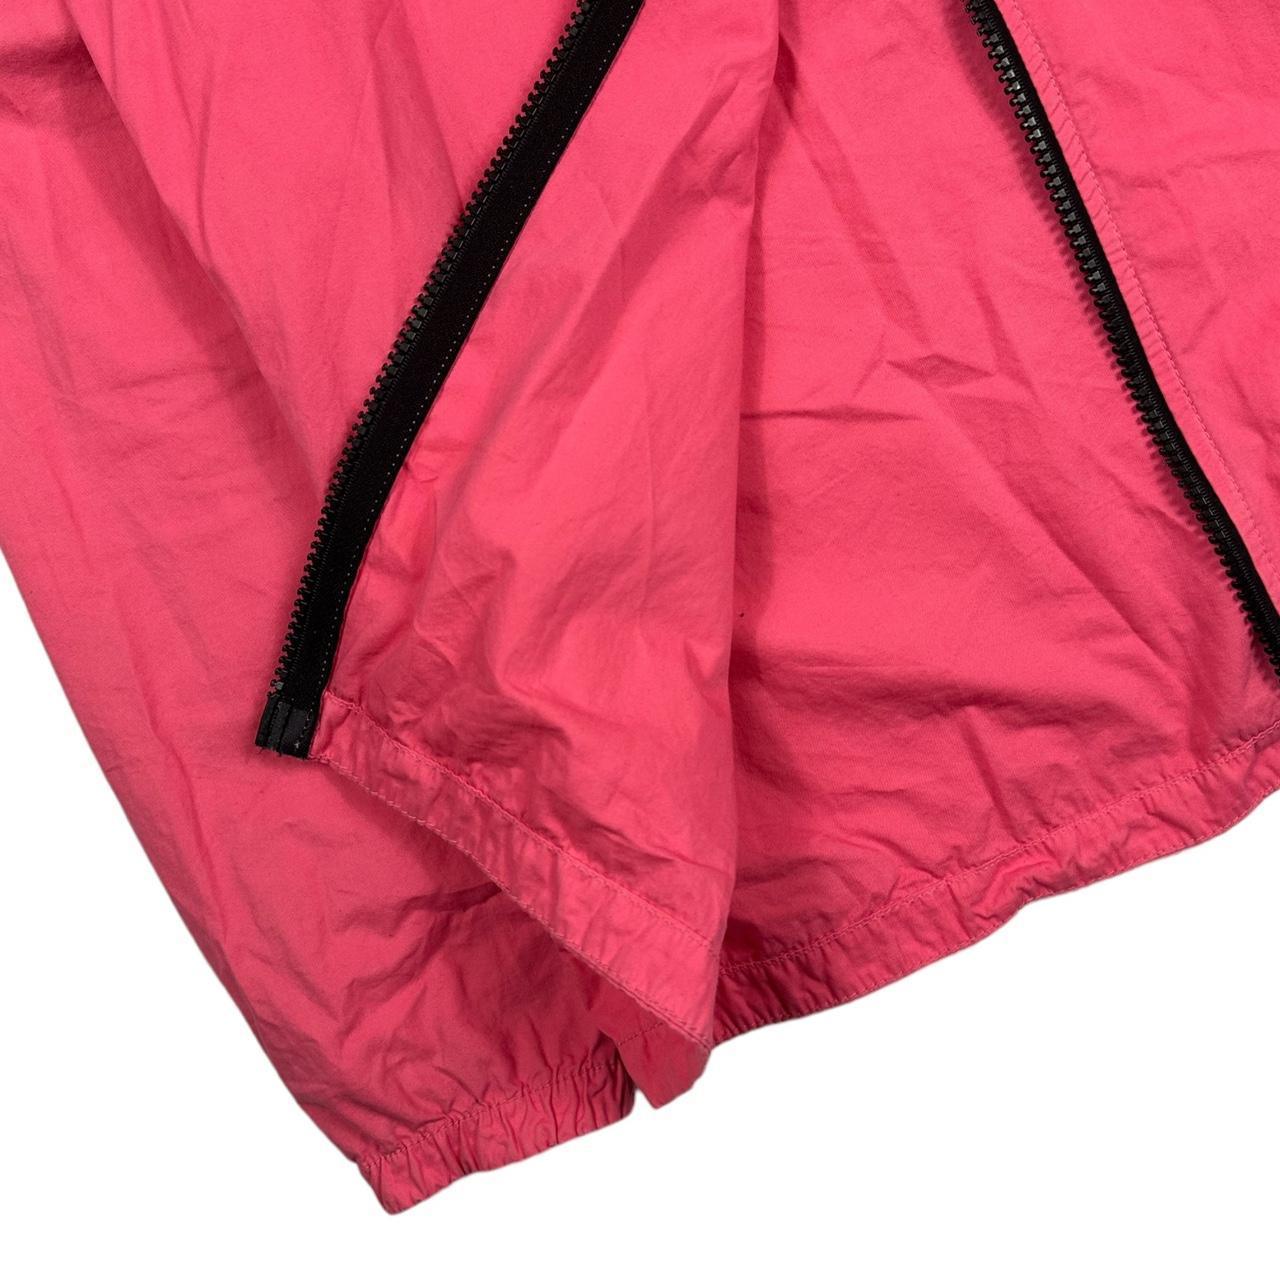 A/W 2020 Stone Island Zipped Pink Over-shirt - Known Source